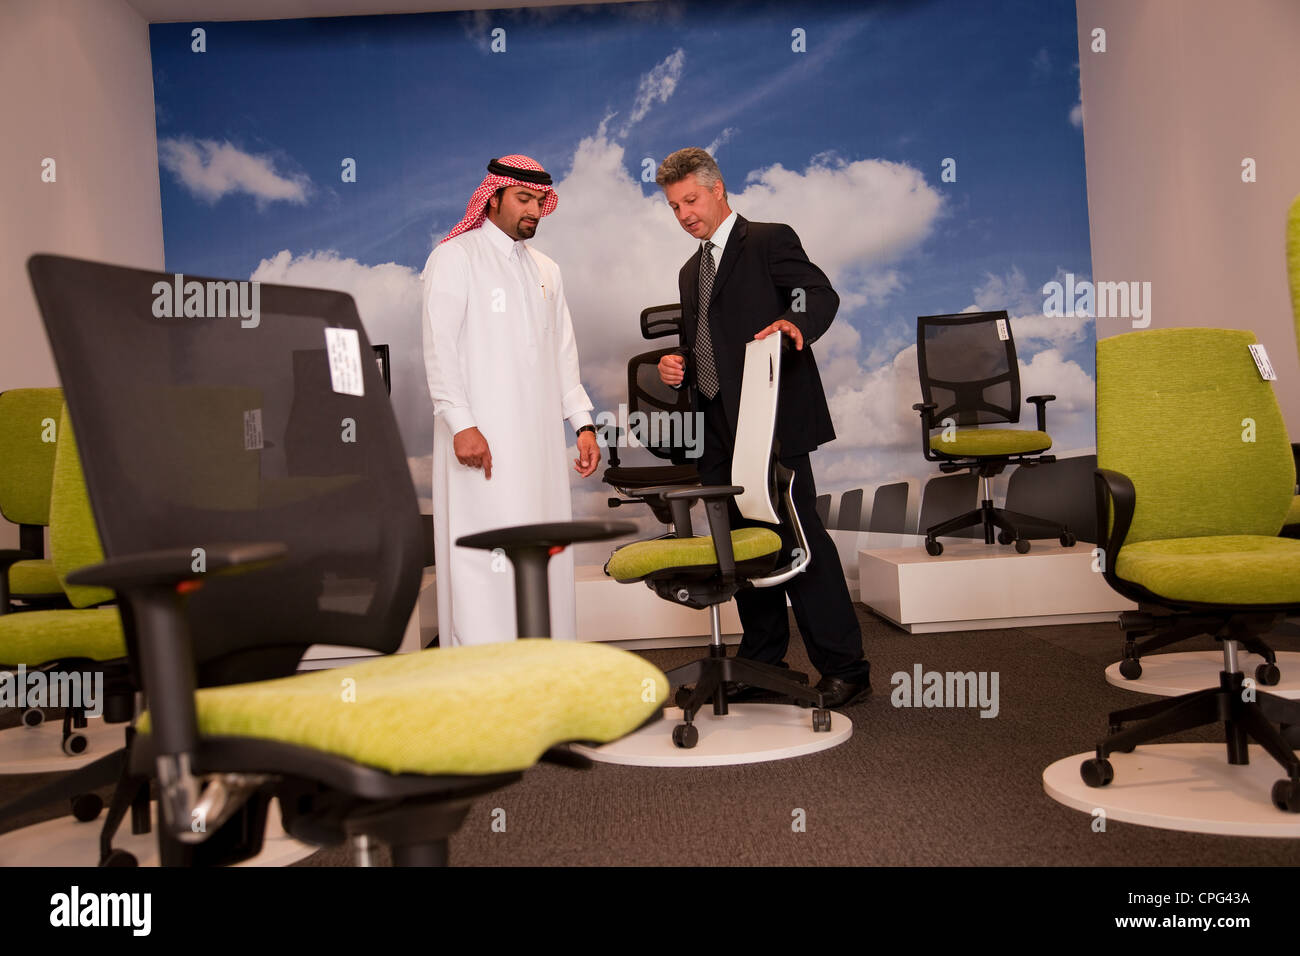 Salesman assisting arab man shopping for office chairs in furniture store. Stock Photo